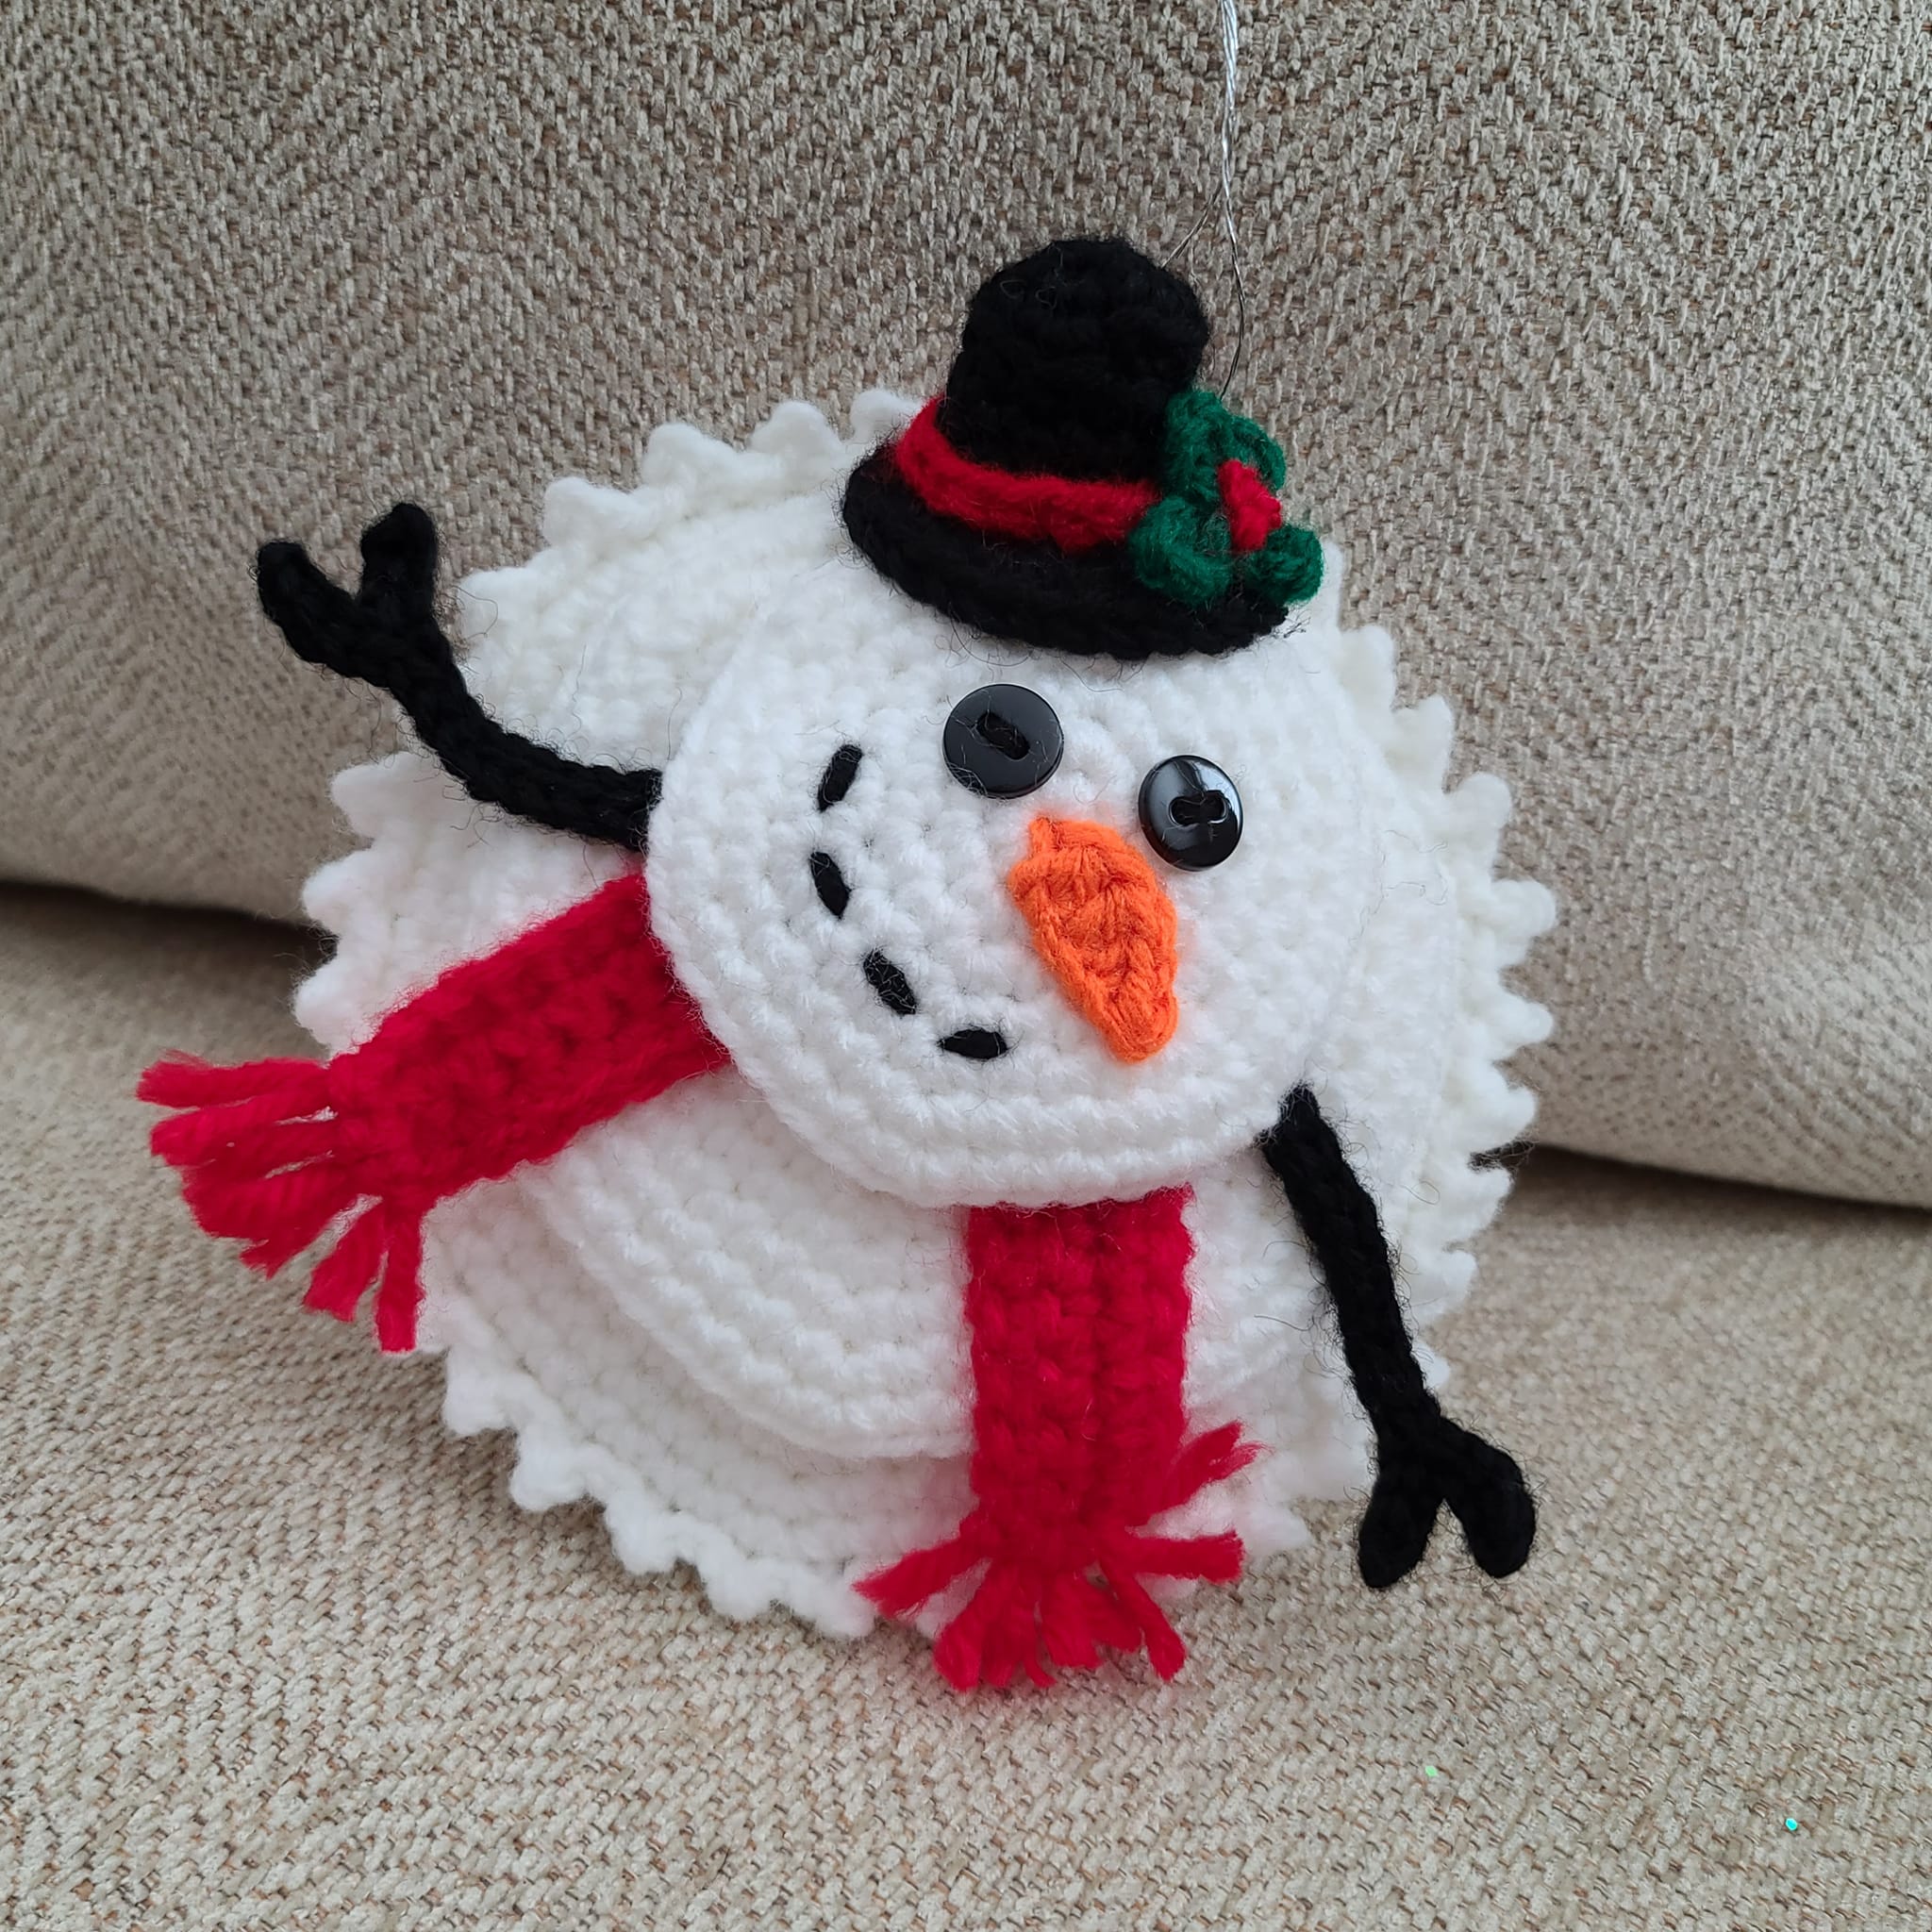 Handmade Crochet Melted Snowman Ornament - Click Image to Close